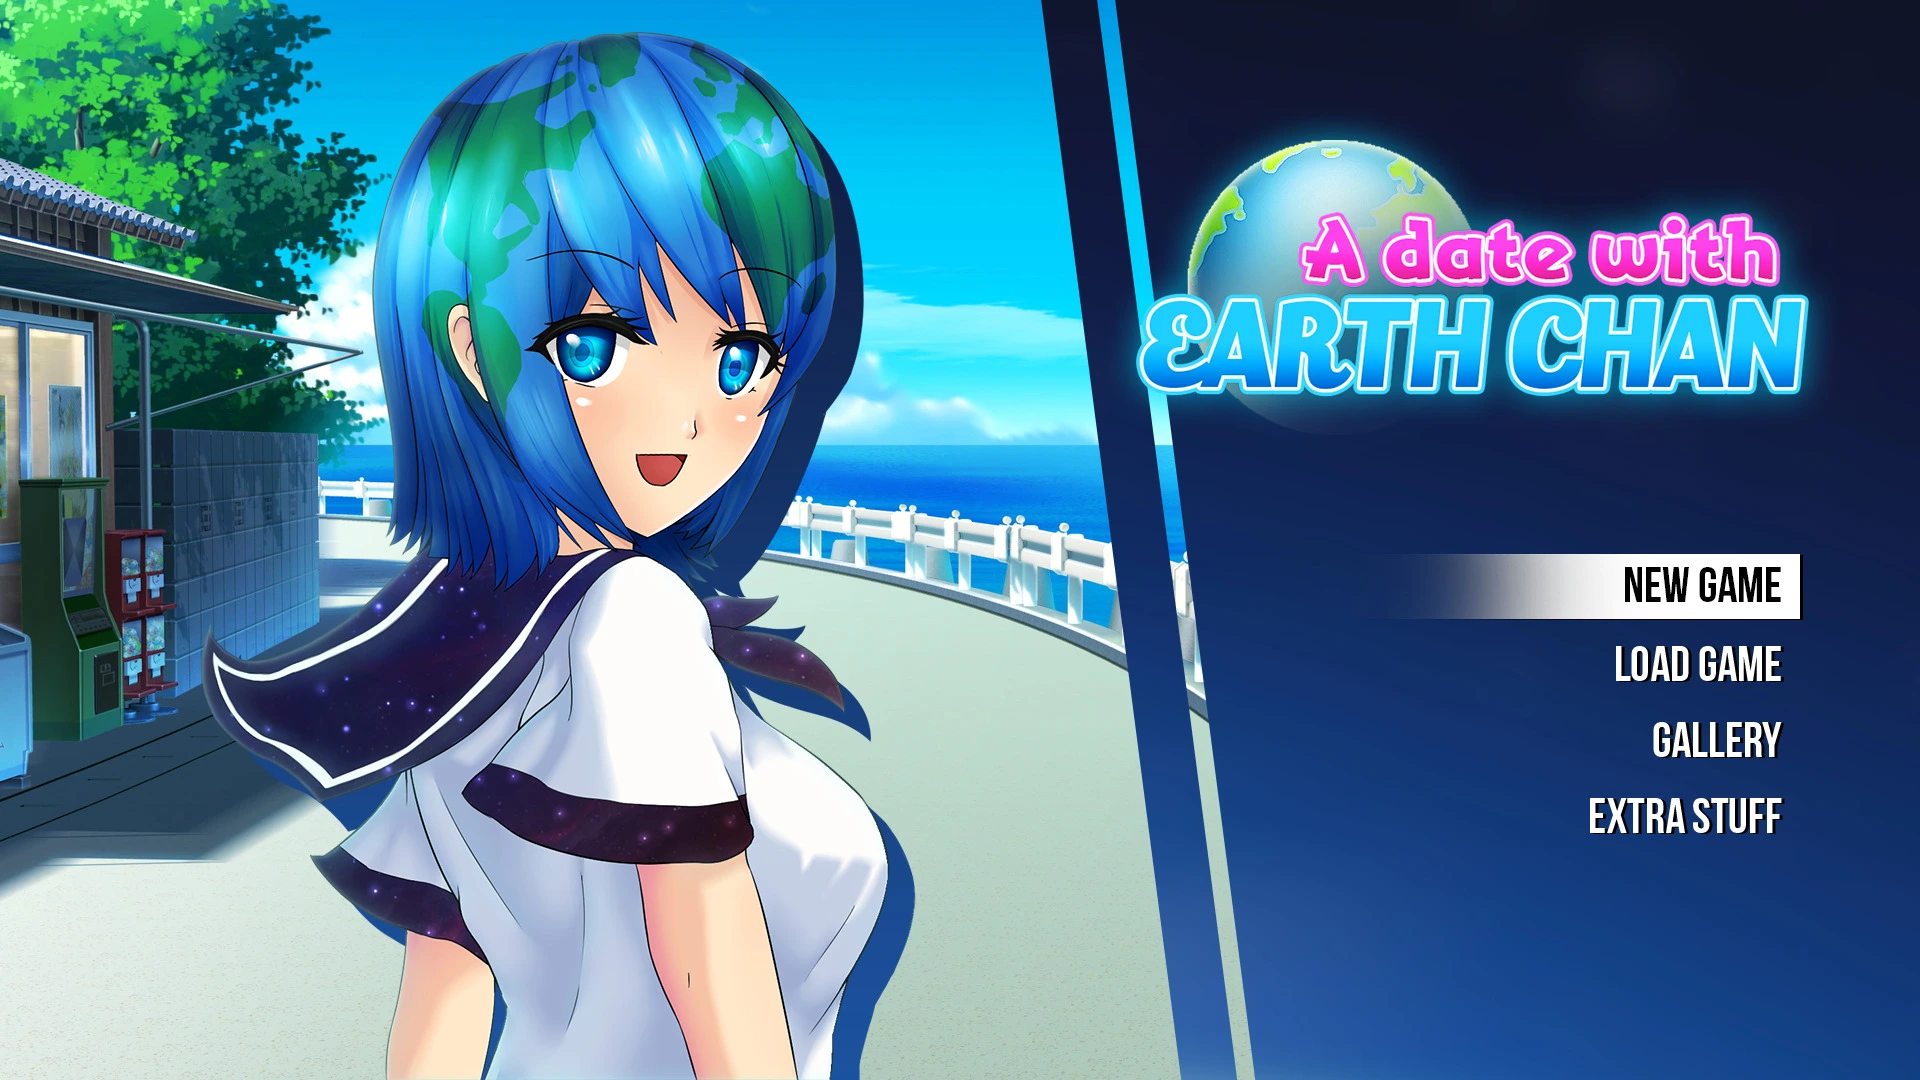 A Date with Earth-Chan main image